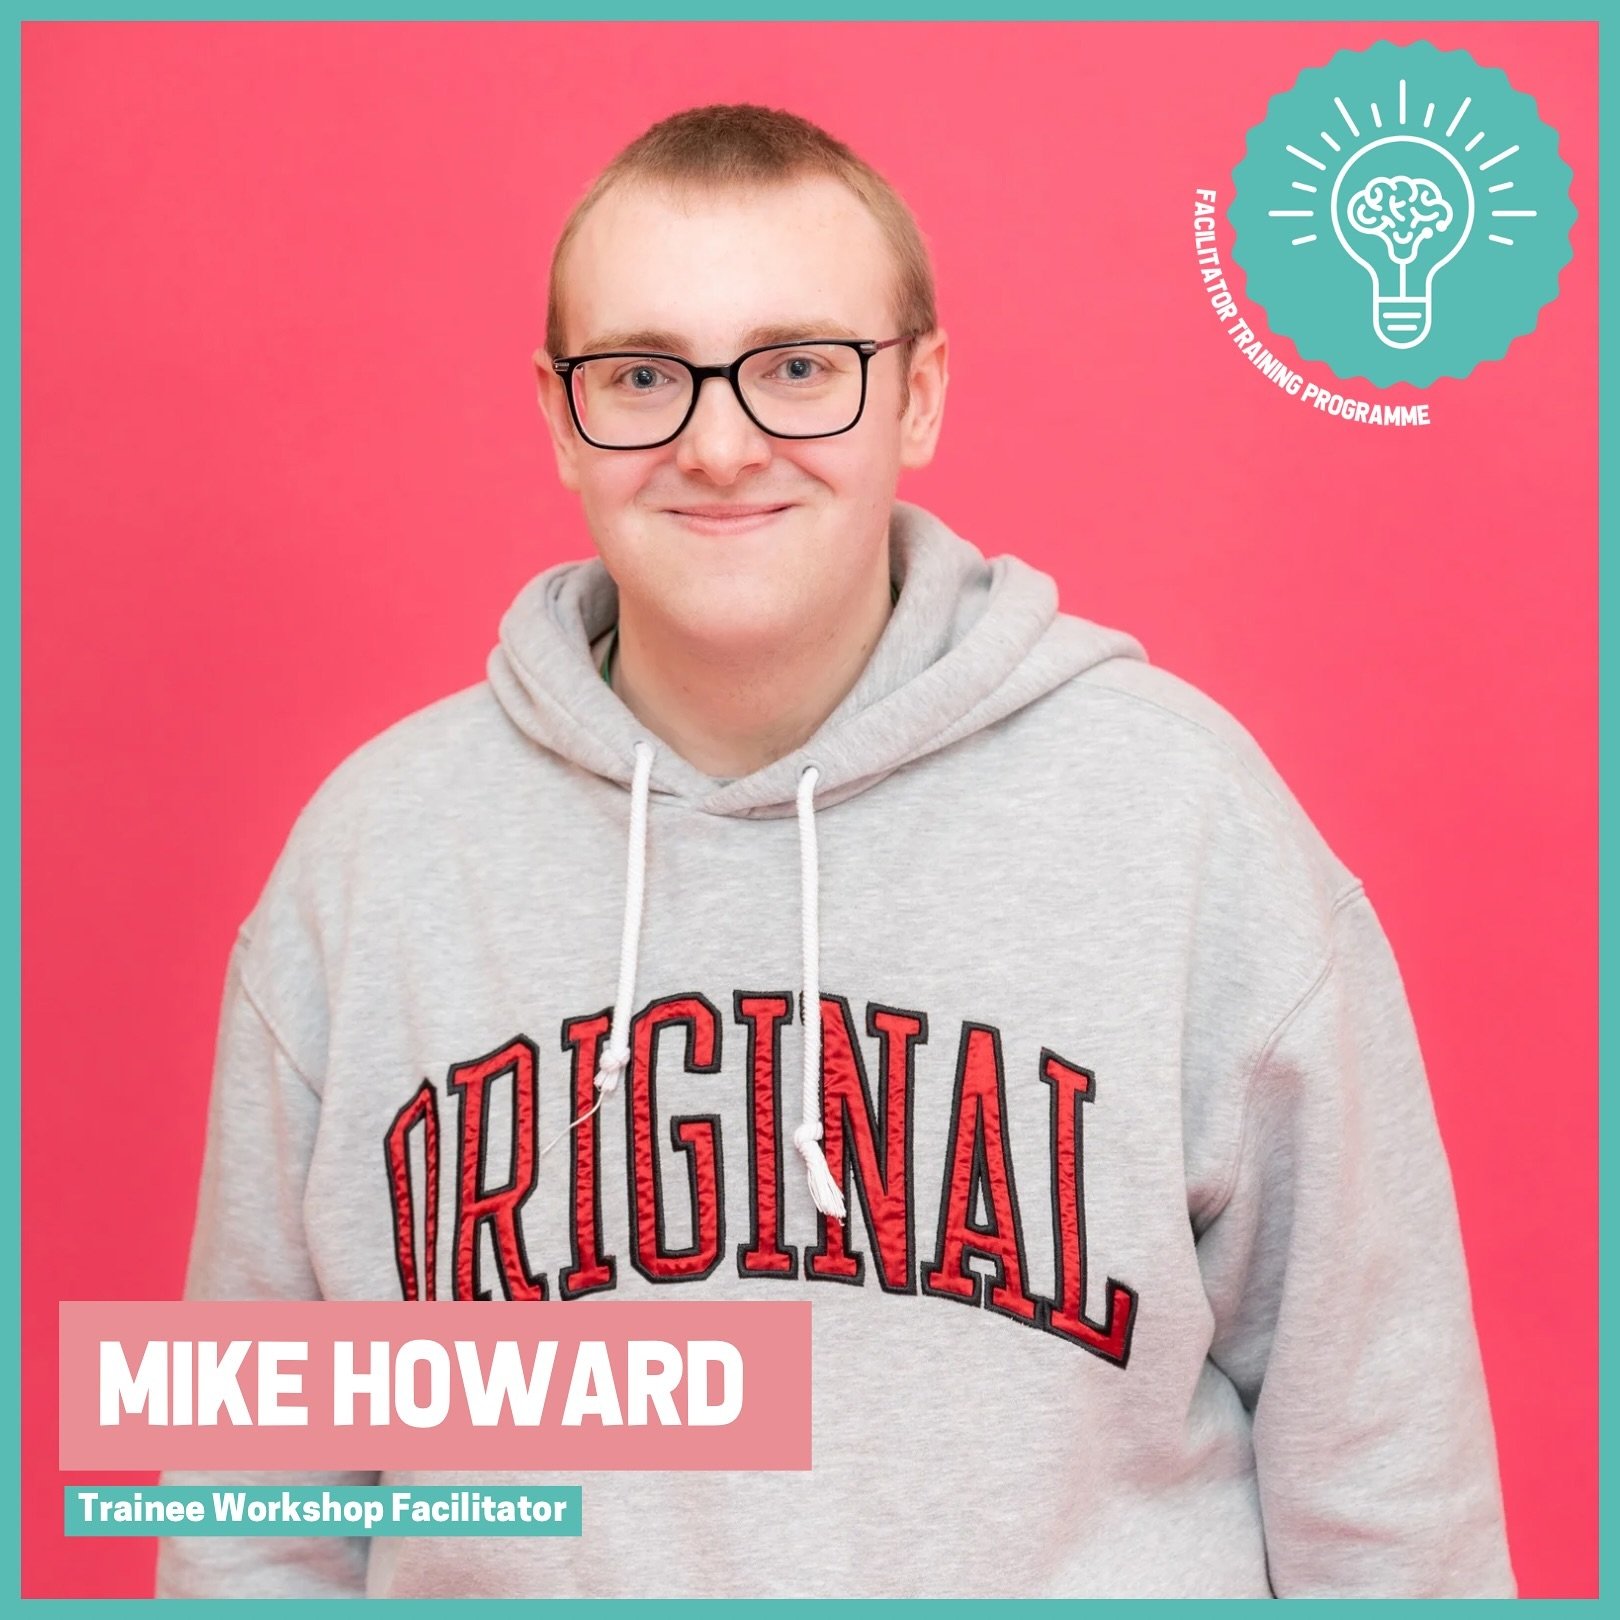 Introducing Mike Howard, one of our trainee workshop facilitators!

&ldquo;I love anything to do with performing arts, I want to take part in acting, singing, dancing, behind the scenes, etc. I wanted to be on the FTP because I love being in an envir